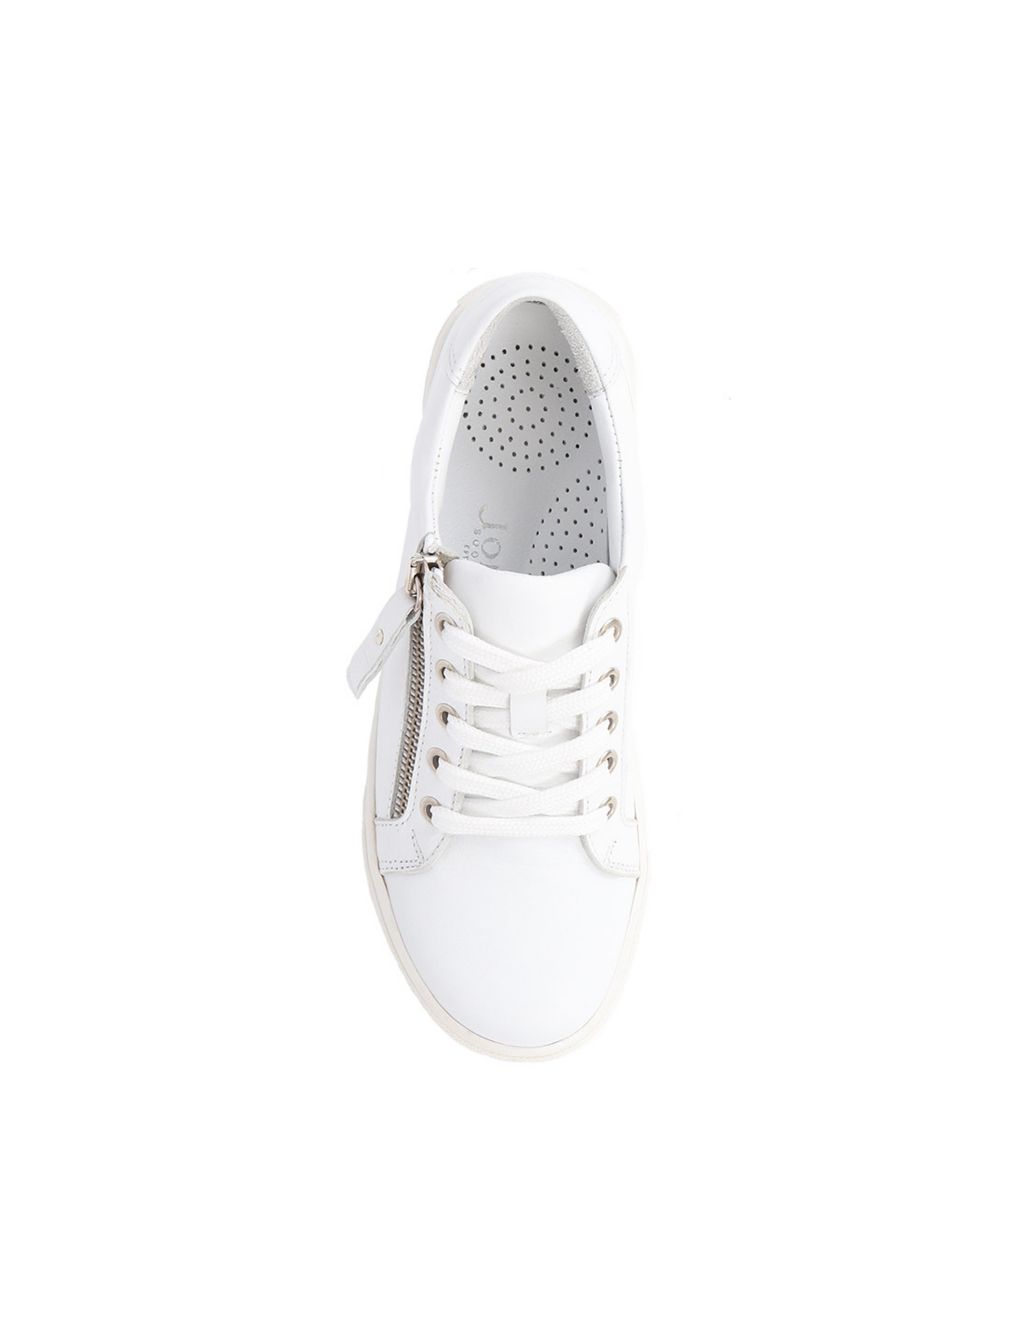 Leather Zip Up Trainers image 4